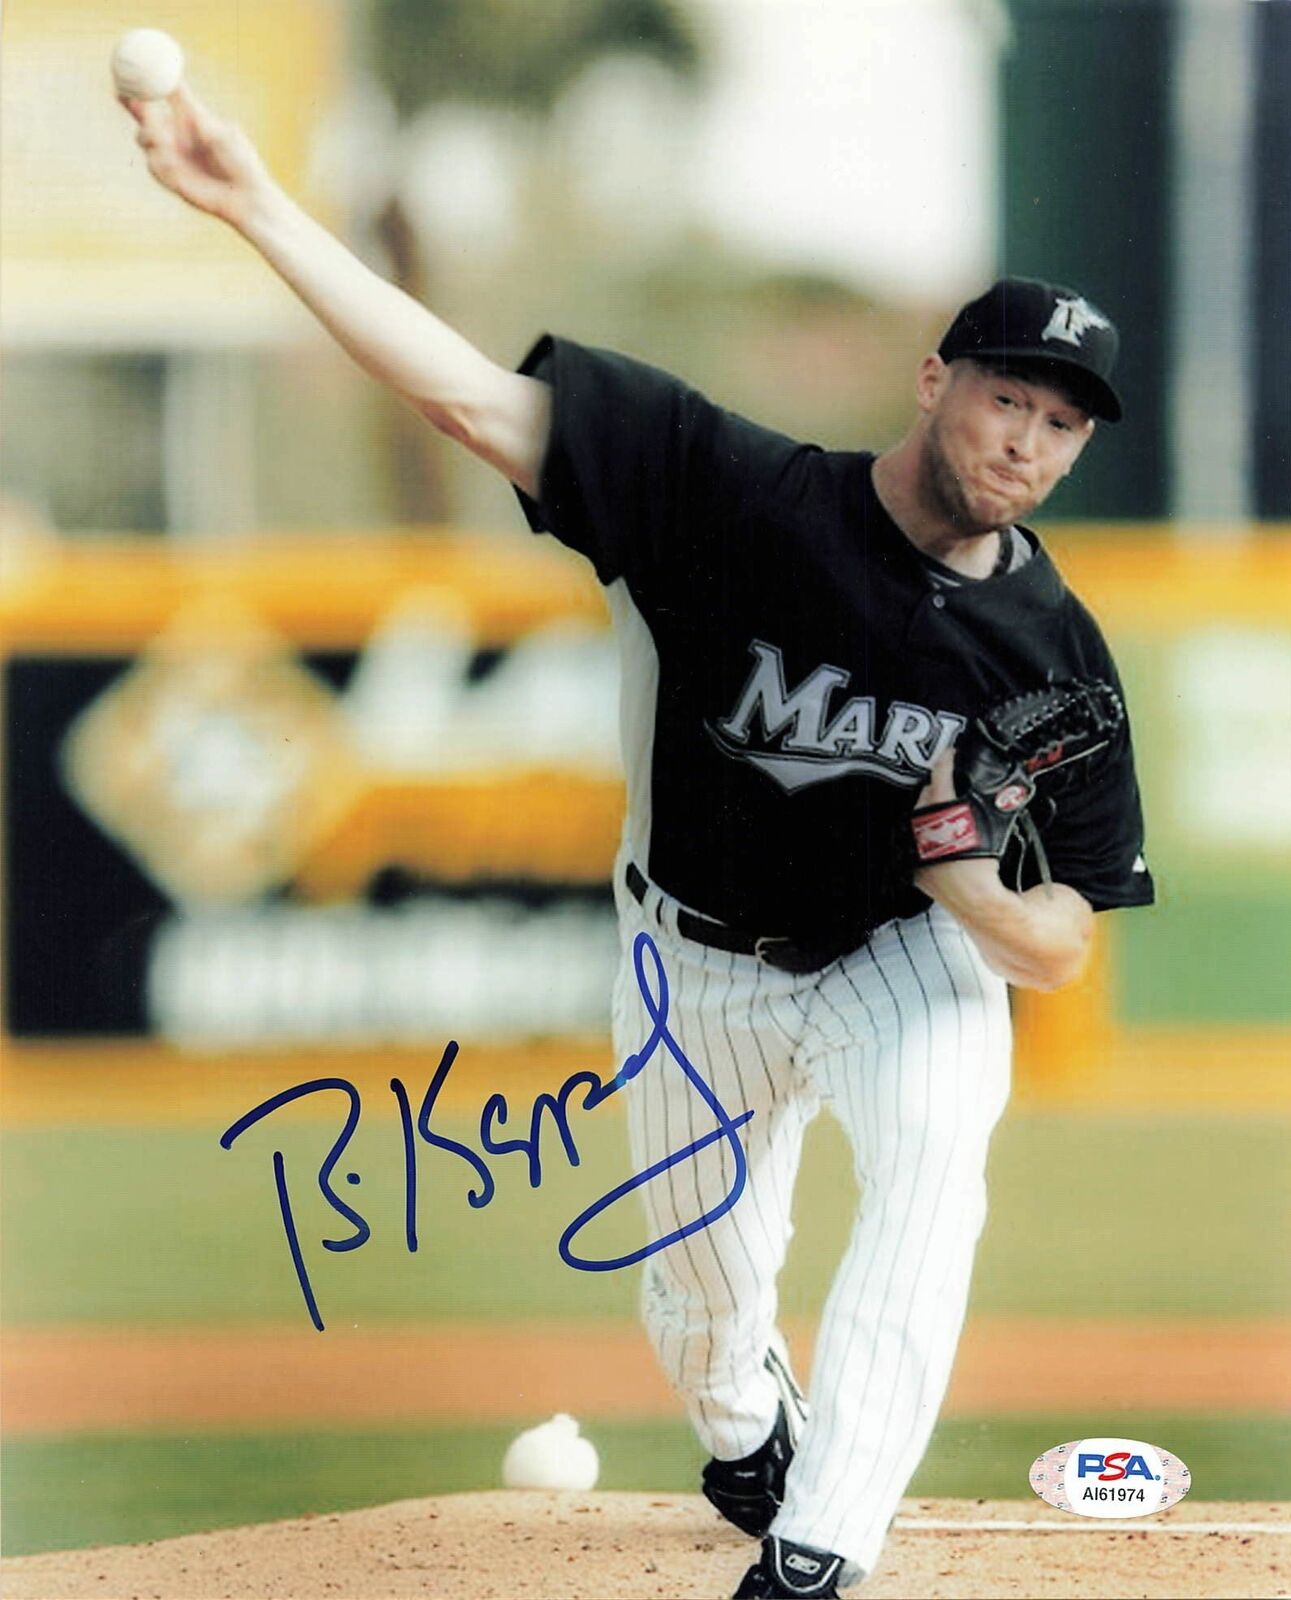 BOBBY KEPPEL signed 8x10 Photo Poster painting PSA/DNA Florida Miami Marlins Autographed